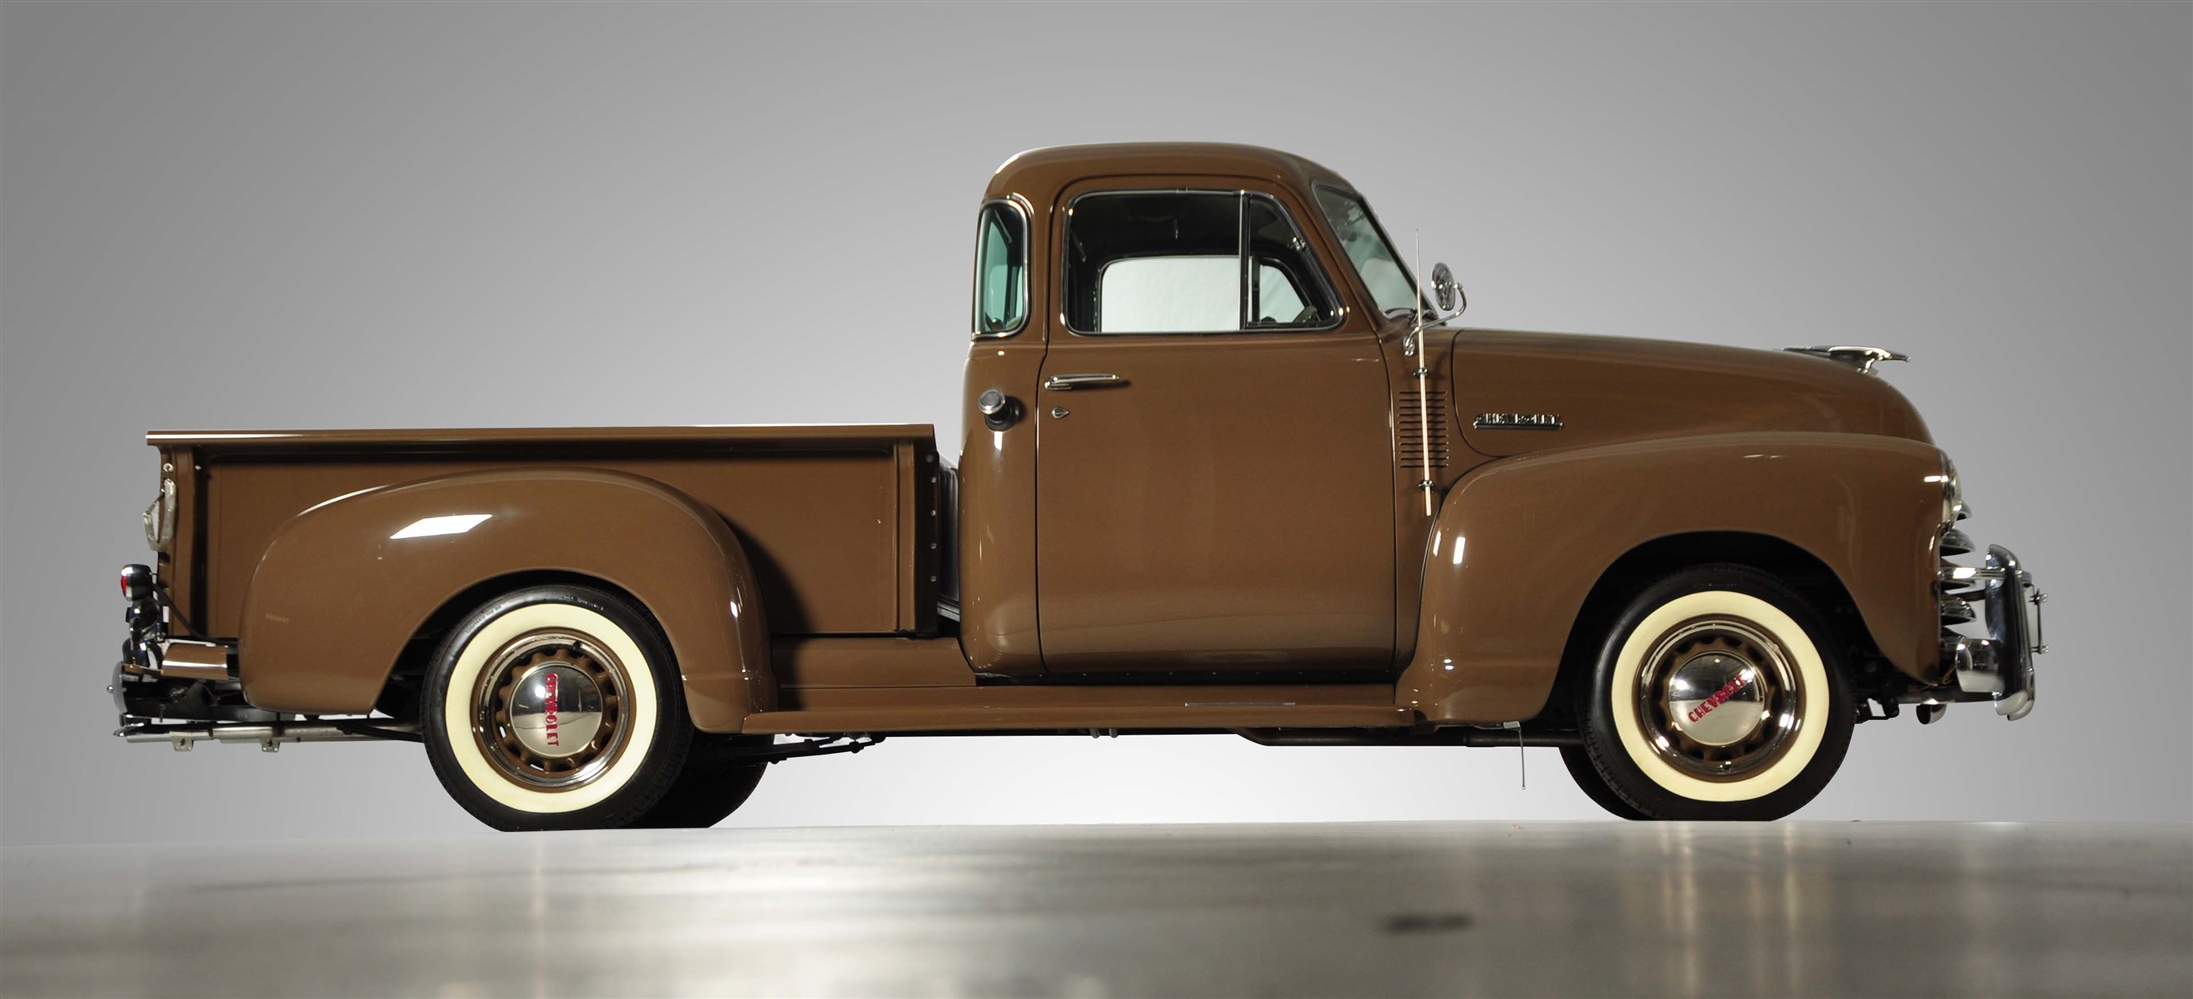 1951 CHEVY 3100 PICK UP.                          